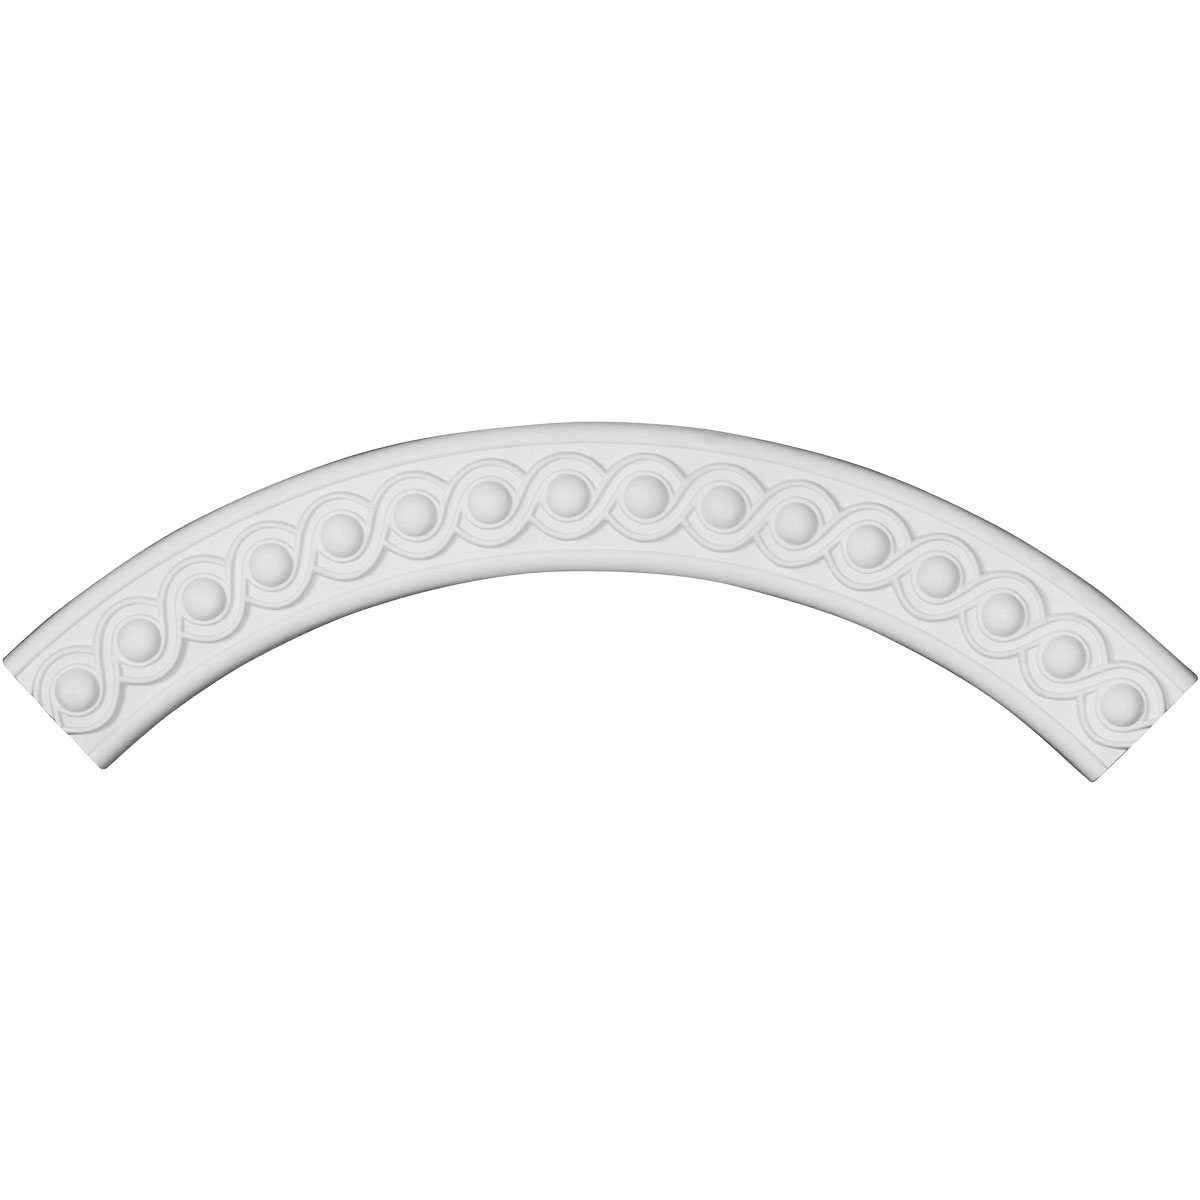 28.75 X 23.63 X 2.63 X 0.63 In. Hillsborough Ceiling Ring - 0.25 Of Complete Circle